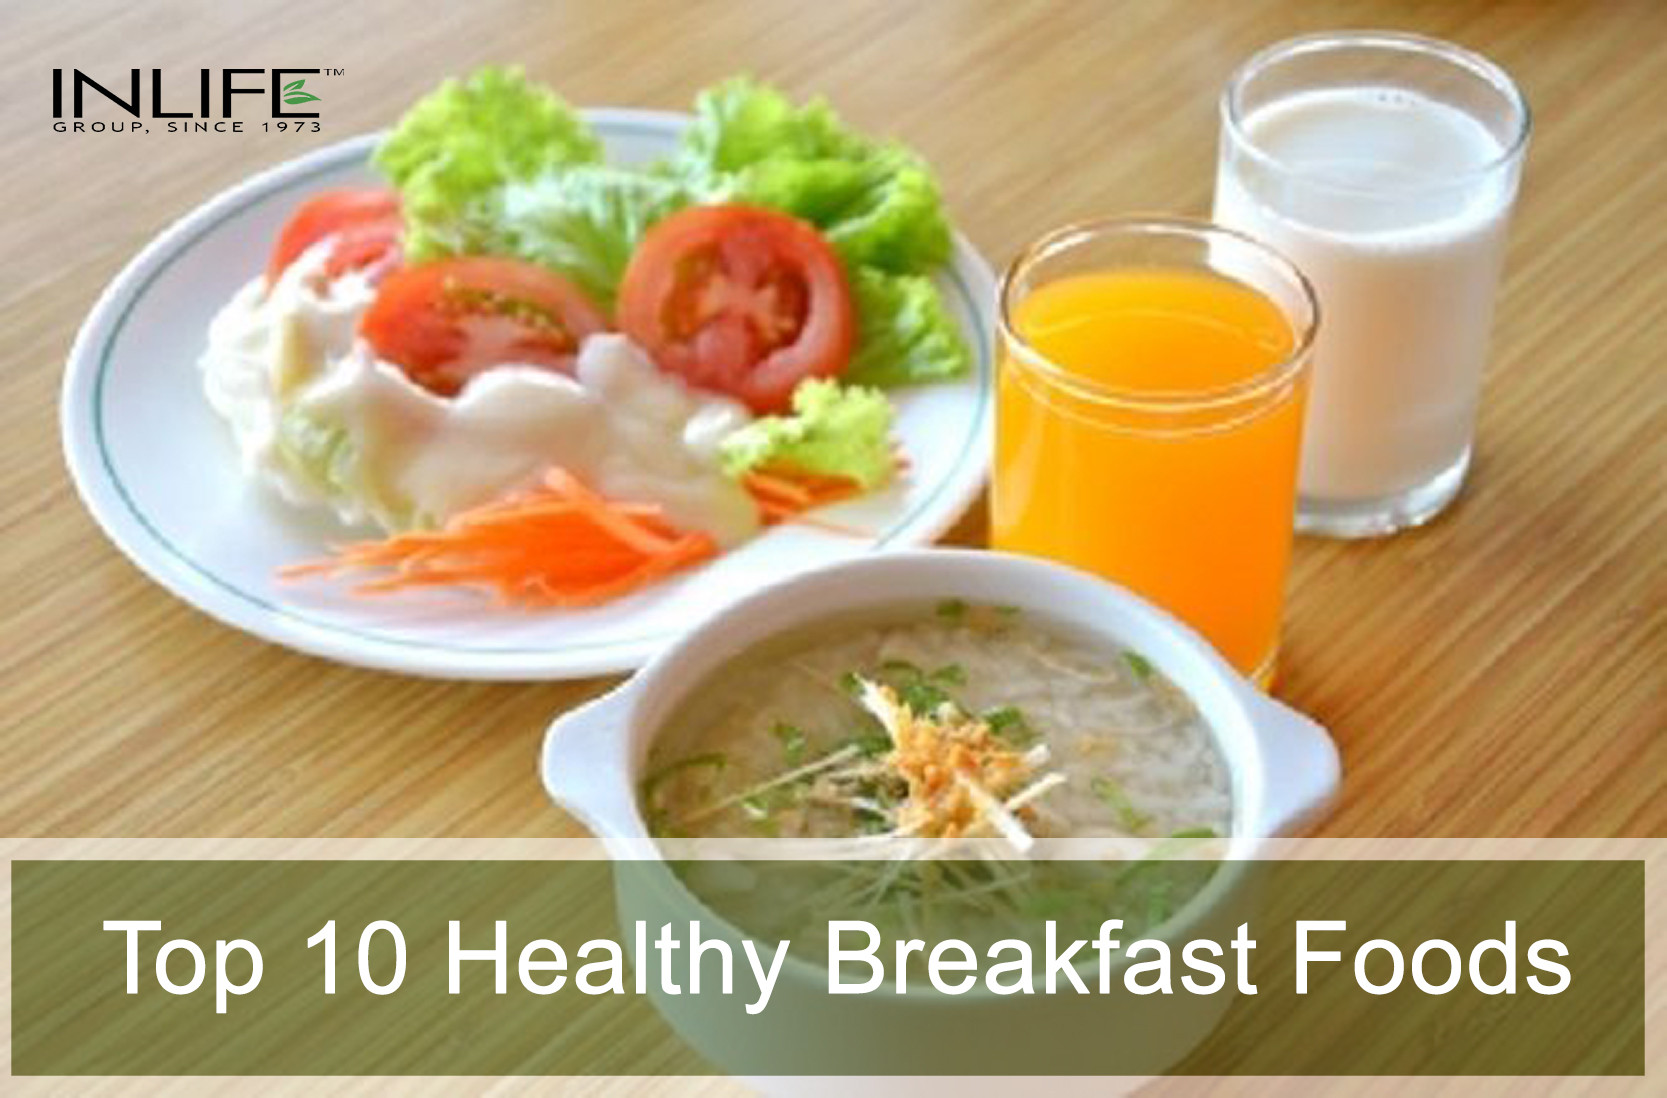 Top 10 Healthy Breakfast
 Top 10 Healthy Breakfast Foods to Eat INLIFE Healthcare